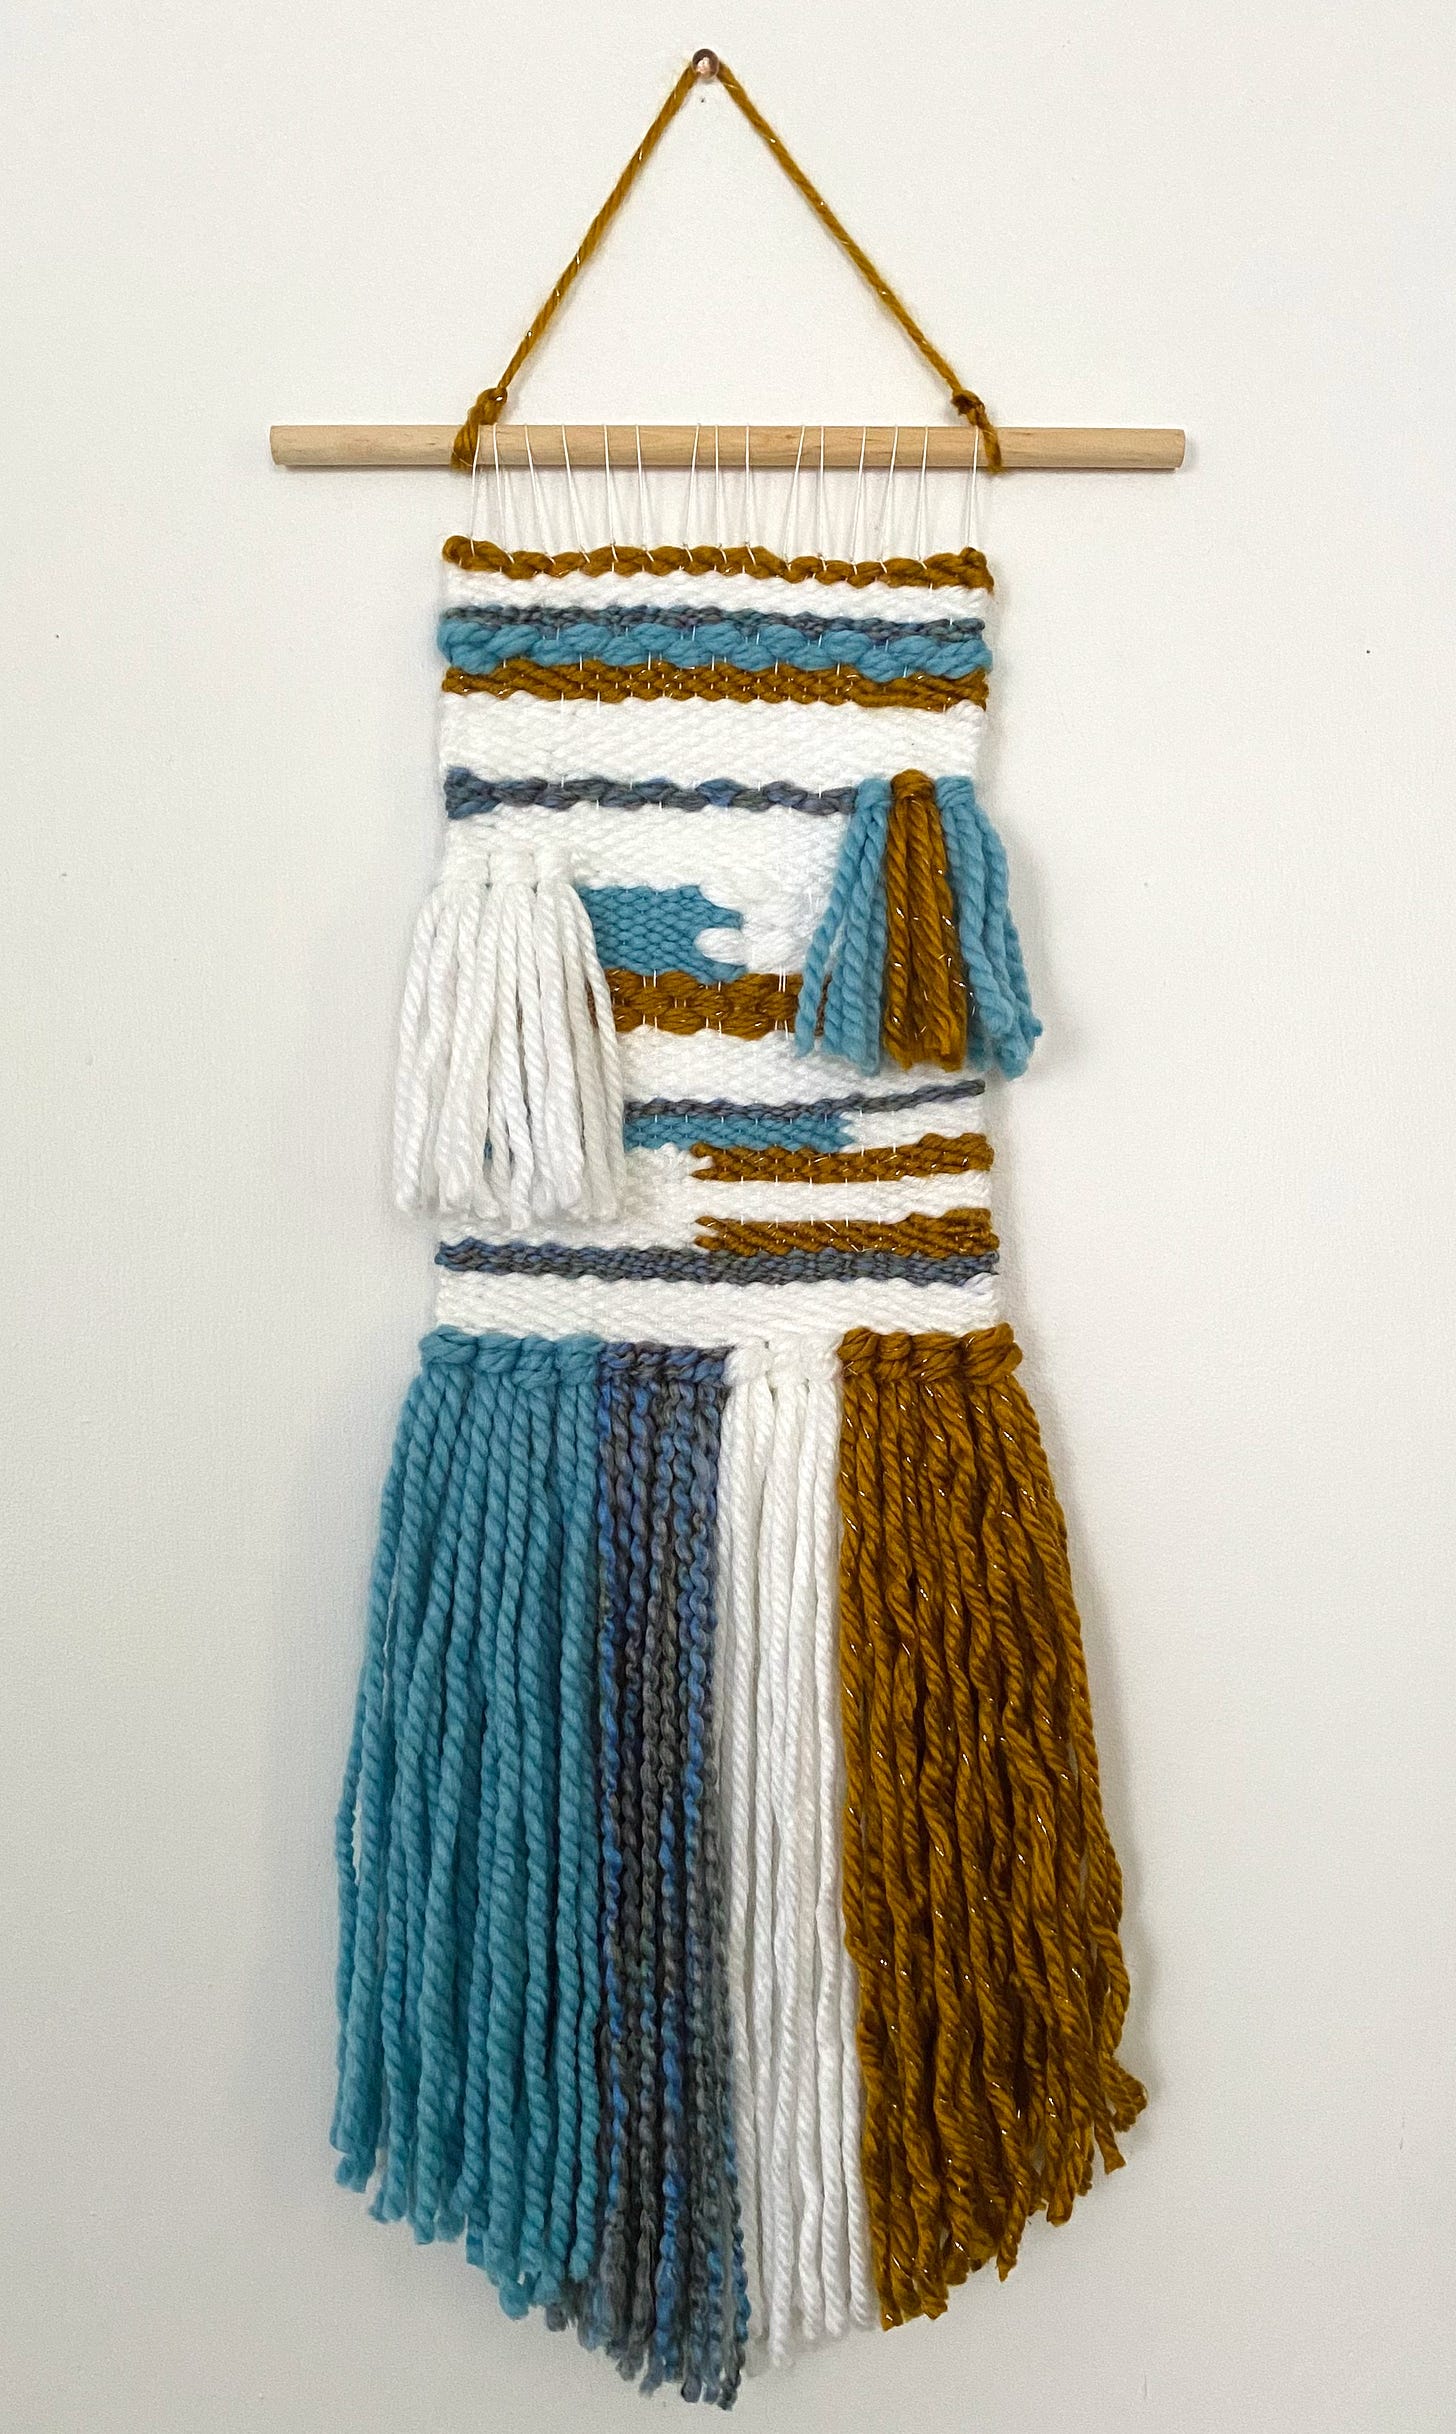 A wall-hanging tapestry weaving with light blue, medium gray-blue, white, and rust colored yarn. It is hanging on a wooden dowel and has an abstract design of lines. 